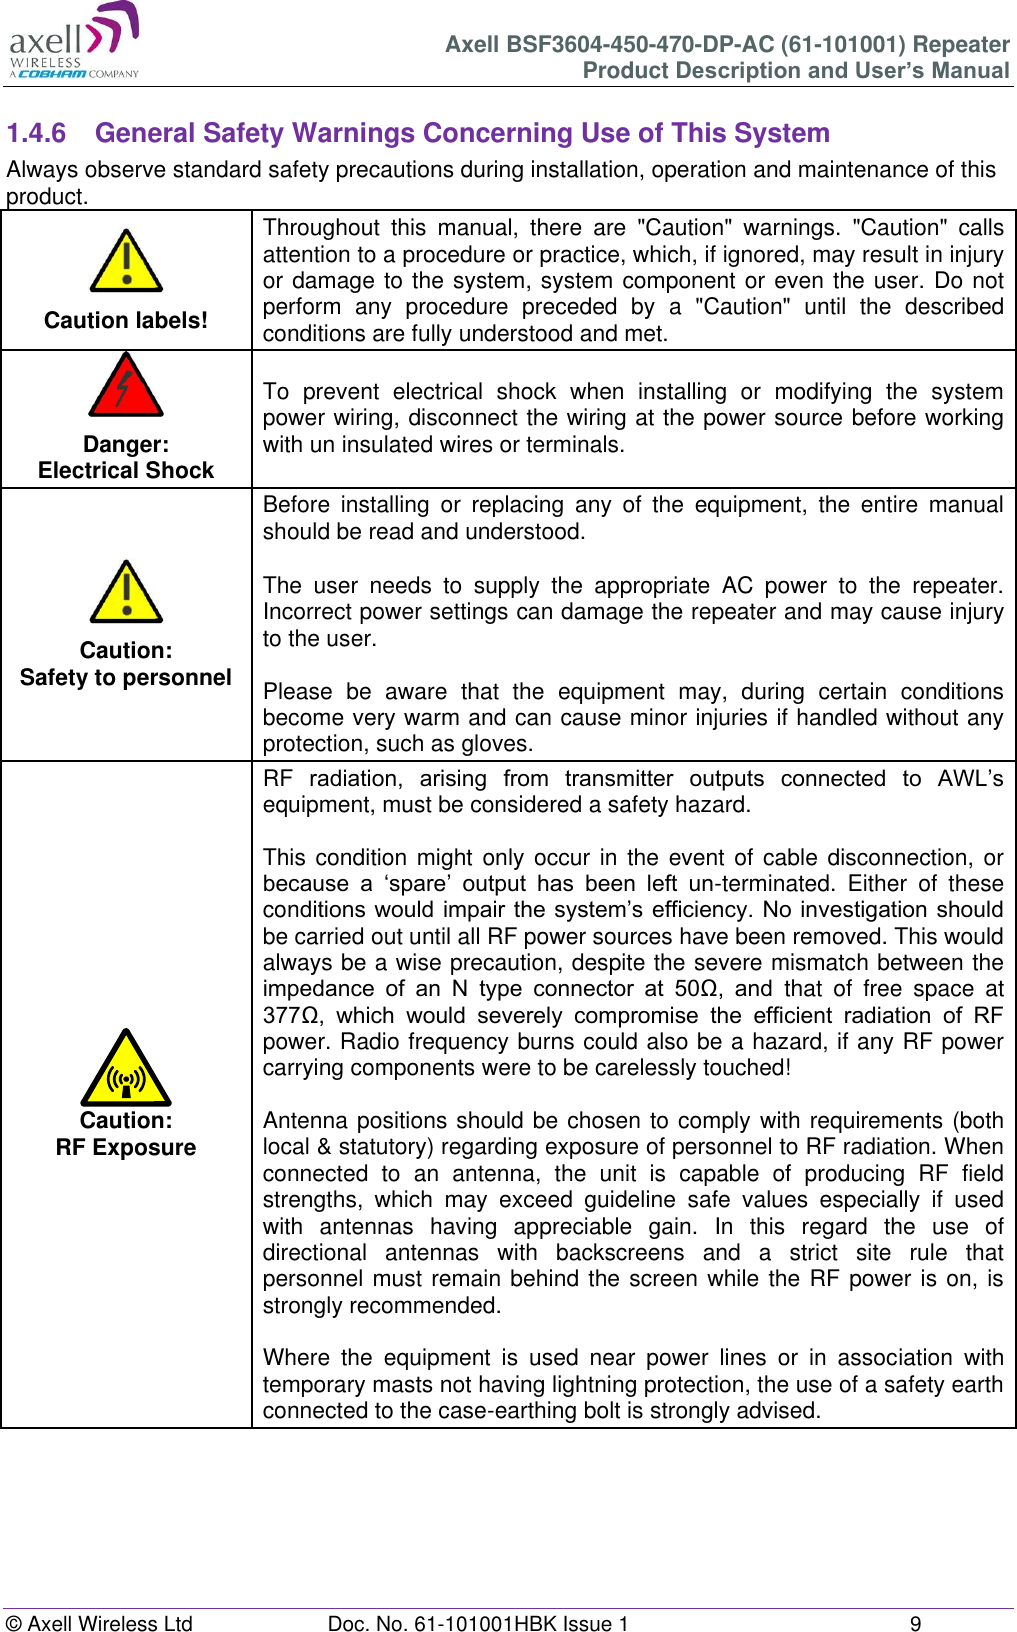 Axell BSF3604-450-470-DP-AC (61-101001) Repeater Product Description and User’s Manual © Axell Wireless Ltd  Doc. No. 61-101001HBK Issue 1  9   1.4.6  General Safety Warnings Concerning Use of This System Always observe standard safety precautions during installation, operation and maintenance of this product. Caution labels! Throughout  this  manual,  there  are  &quot;Caution&quot;  warnings.  &quot;Caution&quot;  calls attention to a procedure or practice, which, if ignored, may result in injury or damage to the system, system component or even the user. Do not perform  any  procedure  preceded  by  a  &quot;Caution&quot;  until  the  described conditions are fully understood and met.  Danger: Electrical Shock To  prevent  electrical  shock  when  installing  or  modifying  the  system power wiring, disconnect the wiring at the power source before working with un insulated wires or terminals. Caution: Safety to personnel Before  installing  or  replacing  any  of  the  equipment,  the  entire  manual should be read and understood.  The  user  needs  to  supply  the  appropriate  AC  power  to  the  repeater. Incorrect power settings can damage the repeater and may cause injury to the user.  Please  be  aware  that  the  equipment  may,  during  certain  conditions become very warm and can cause minor injuries if handled without any protection, such as gloves. Caution: RF Exposure RF  radiation,  arising  from  transmitter  outputs  connected  to  AWL’s equipment, must be considered a safety hazard.  This condition might  only occur in the  event of cable disconnection,  or because  a  ‘spare’  output  has  been  left  un-terminated.  Either  of  these conditions would impair the system’s efficiency. No investigation should be carried out until all RF power sources have been removed. This would always be a wise precaution, despite the severe mismatch between the impedance  of  an  N  type  connector  at  50Ω,  and  that  of  free  space  at 377Ω,  which  would  severely  compromise  the  efficient  radiation  of  RF power. Radio frequency burns could also be a hazard, if any RF power carrying components were to be carelessly touched!  Antenna positions should be chosen to comply with requirements (both local &amp; statutory) regarding exposure of personnel to RF radiation. When connected  to  an  antenna,  the  unit  is  capable  of  producing  RF  field strengths,  which  may  exceed  guideline  safe  values  especially  if  used with  antennas  having  appreciable  gain.  In  this  regard  the  use  of directional  antennas  with  backscreens  and  a  strict  site  rule  that personnel must remain behind the screen while the RF power is on, is strongly recommended.  Where  the  equipment  is  used  near  power  lines  or  in  association  with temporary masts not having lightning protection, the use of a safety earth connected to the case-earthing bolt is strongly advised.         